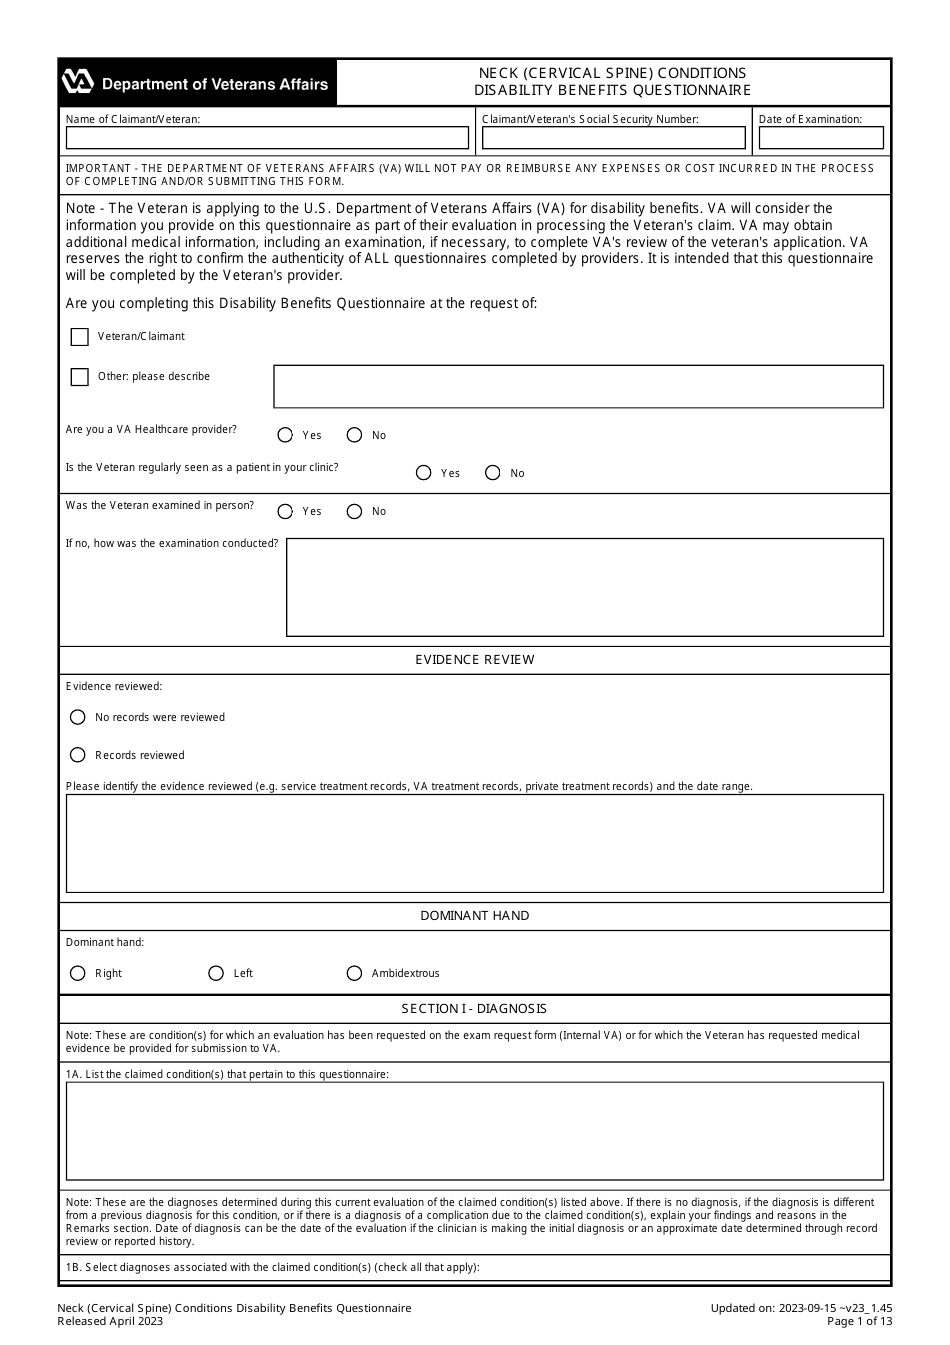 Neck (Cervical Spine) Conditions Disability Benefits Questionnaire, Page 1